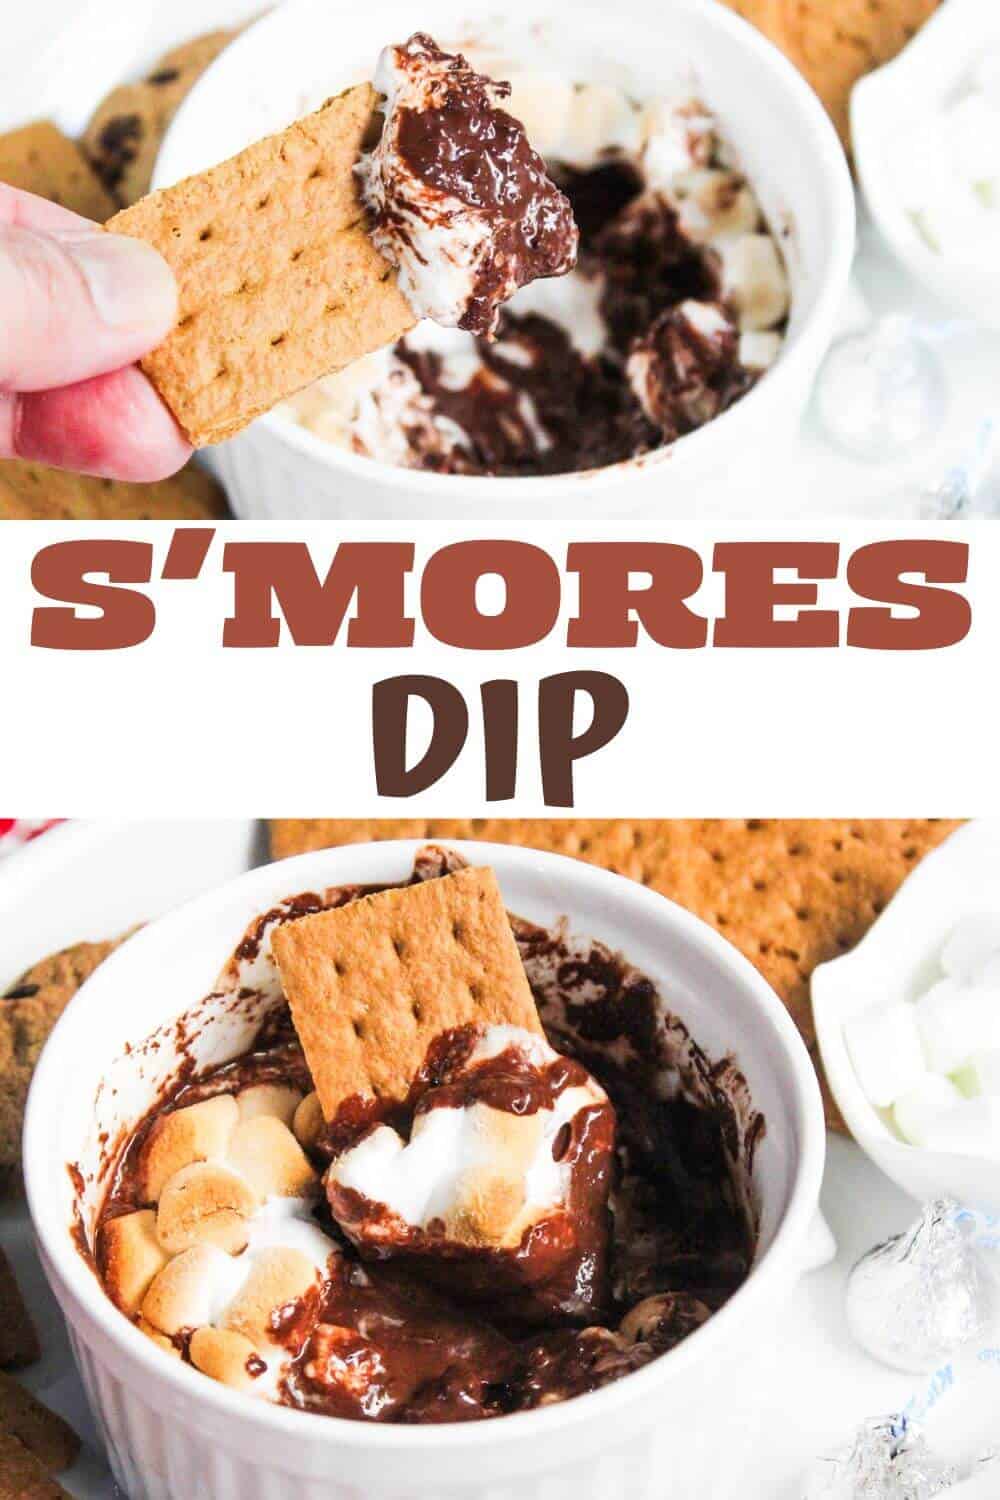 S'mores dip in a bowl with a graham cracker.